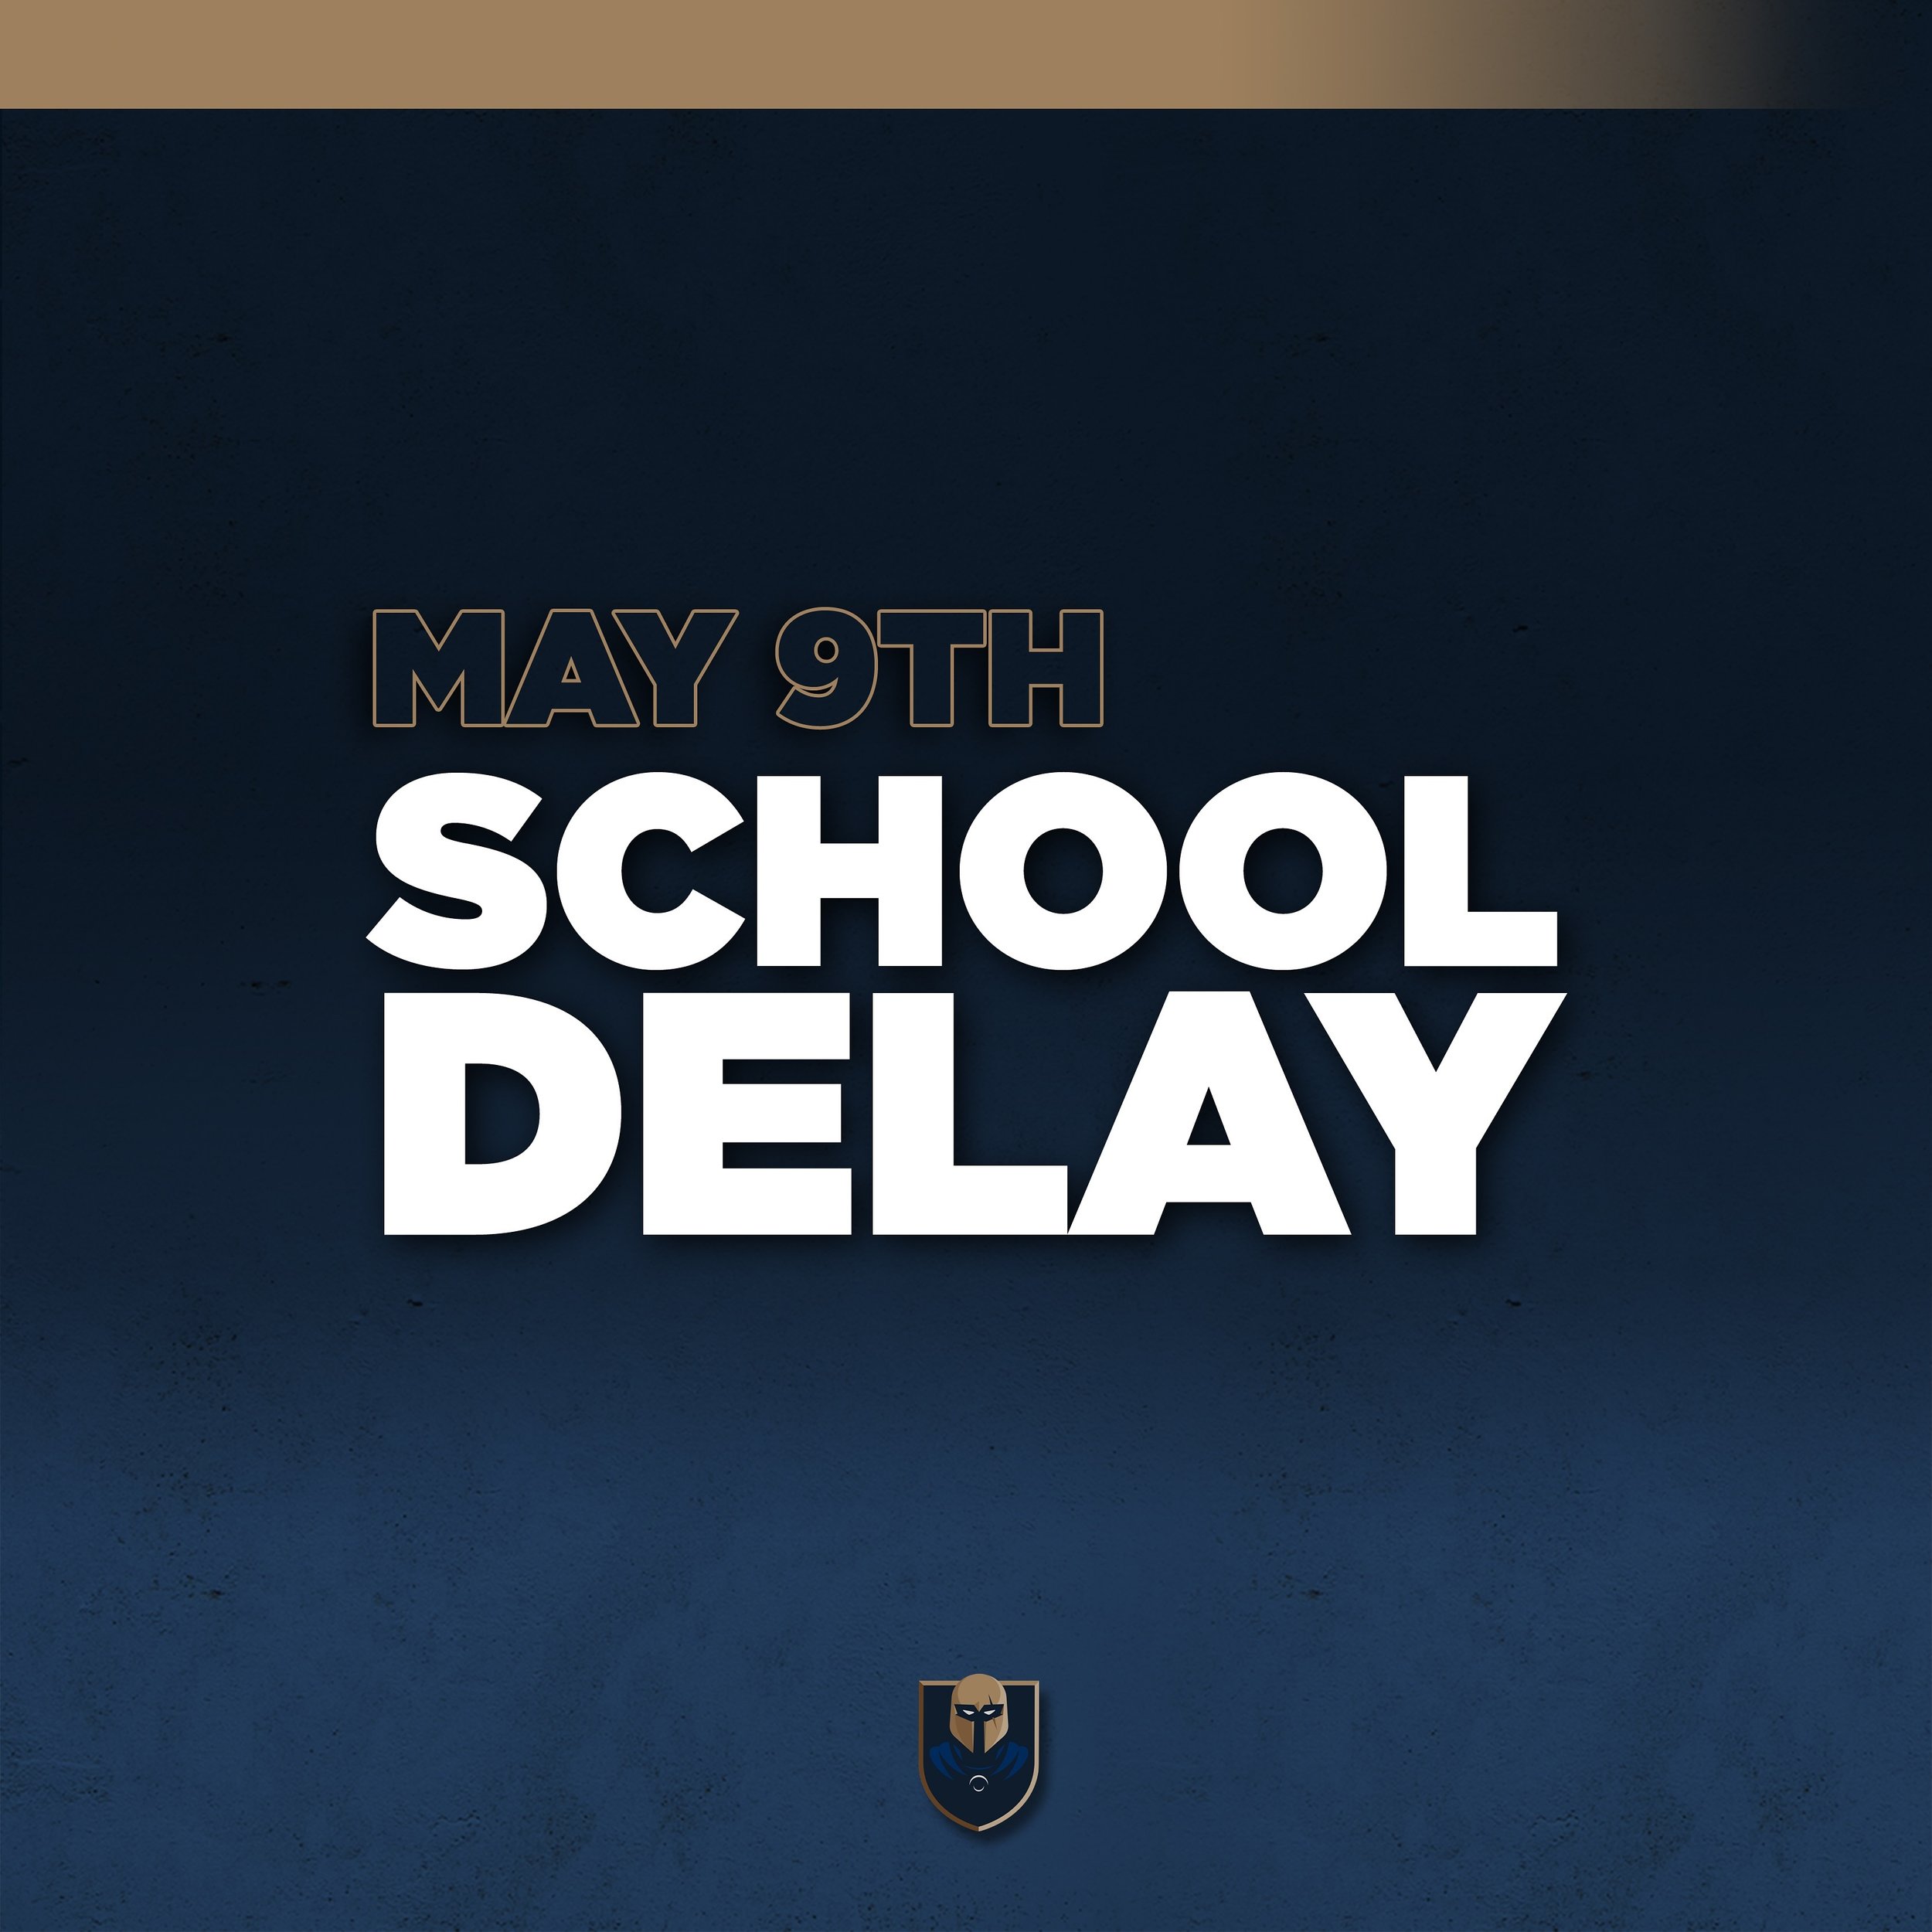 We will operate on a 2-hour delay with staff reporting at 9:30 am and scholars reporting by 10 am.